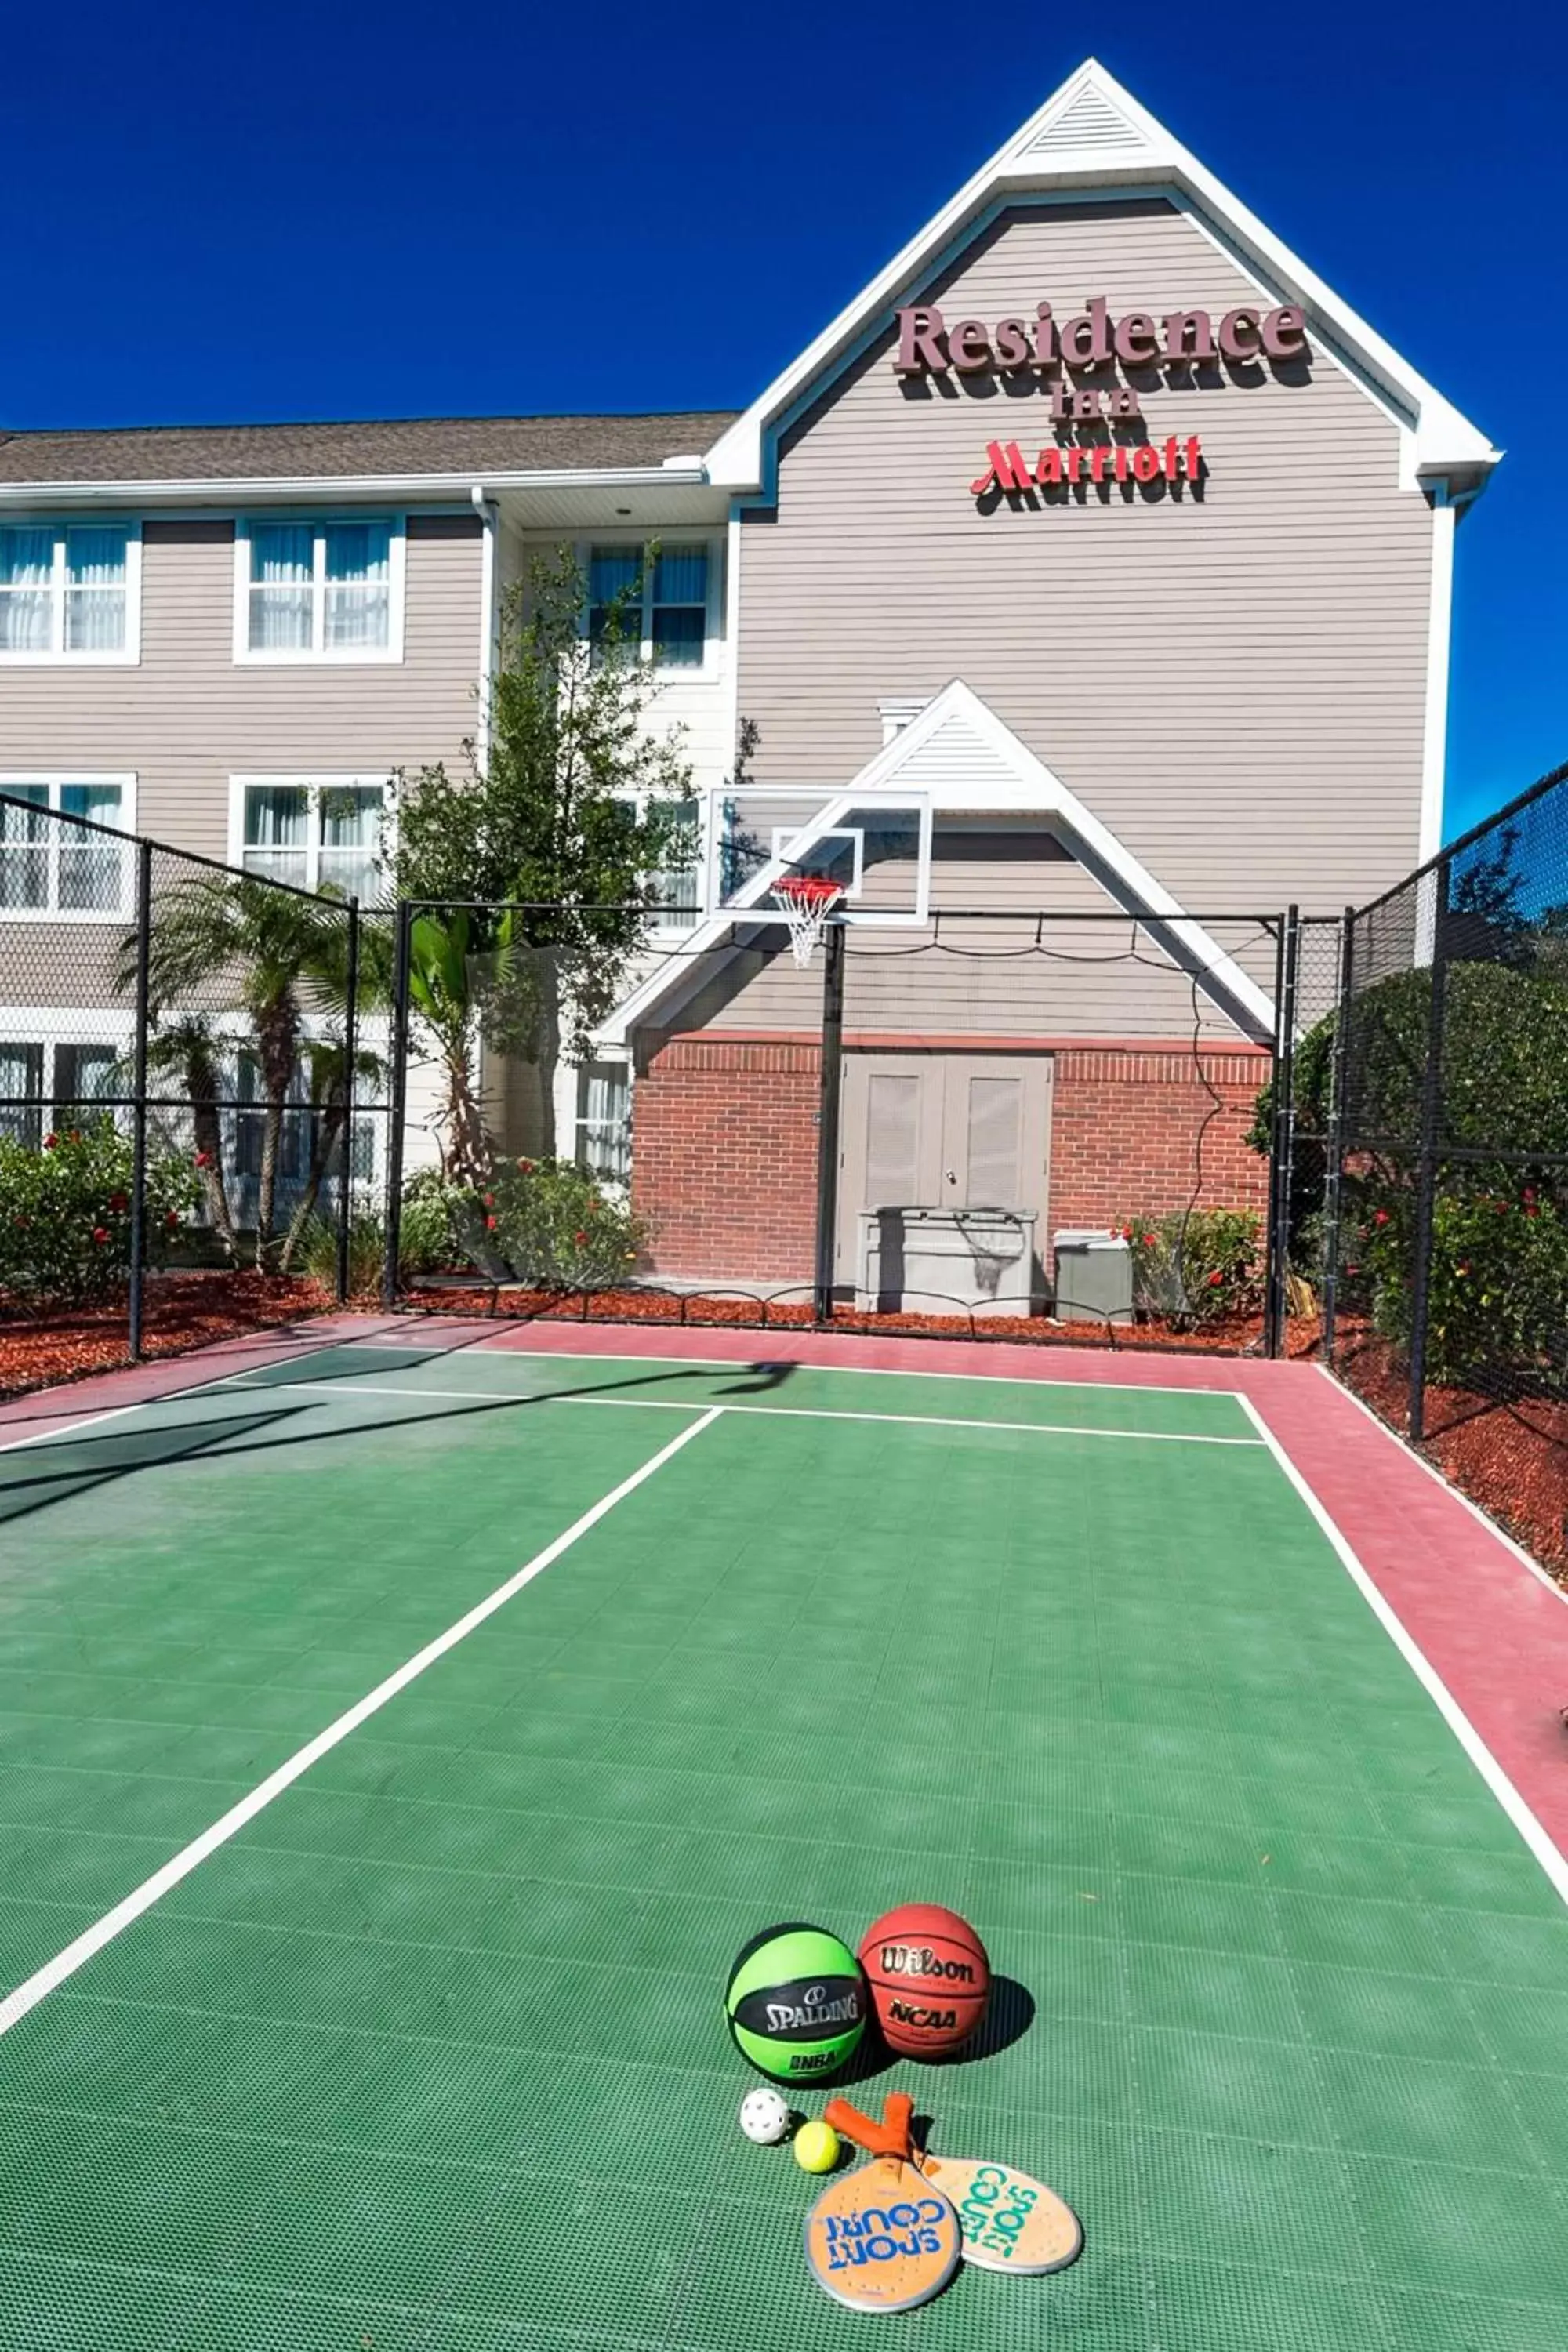 Area and facilities, Property Building in Residence Inn by Marriott Lakeland